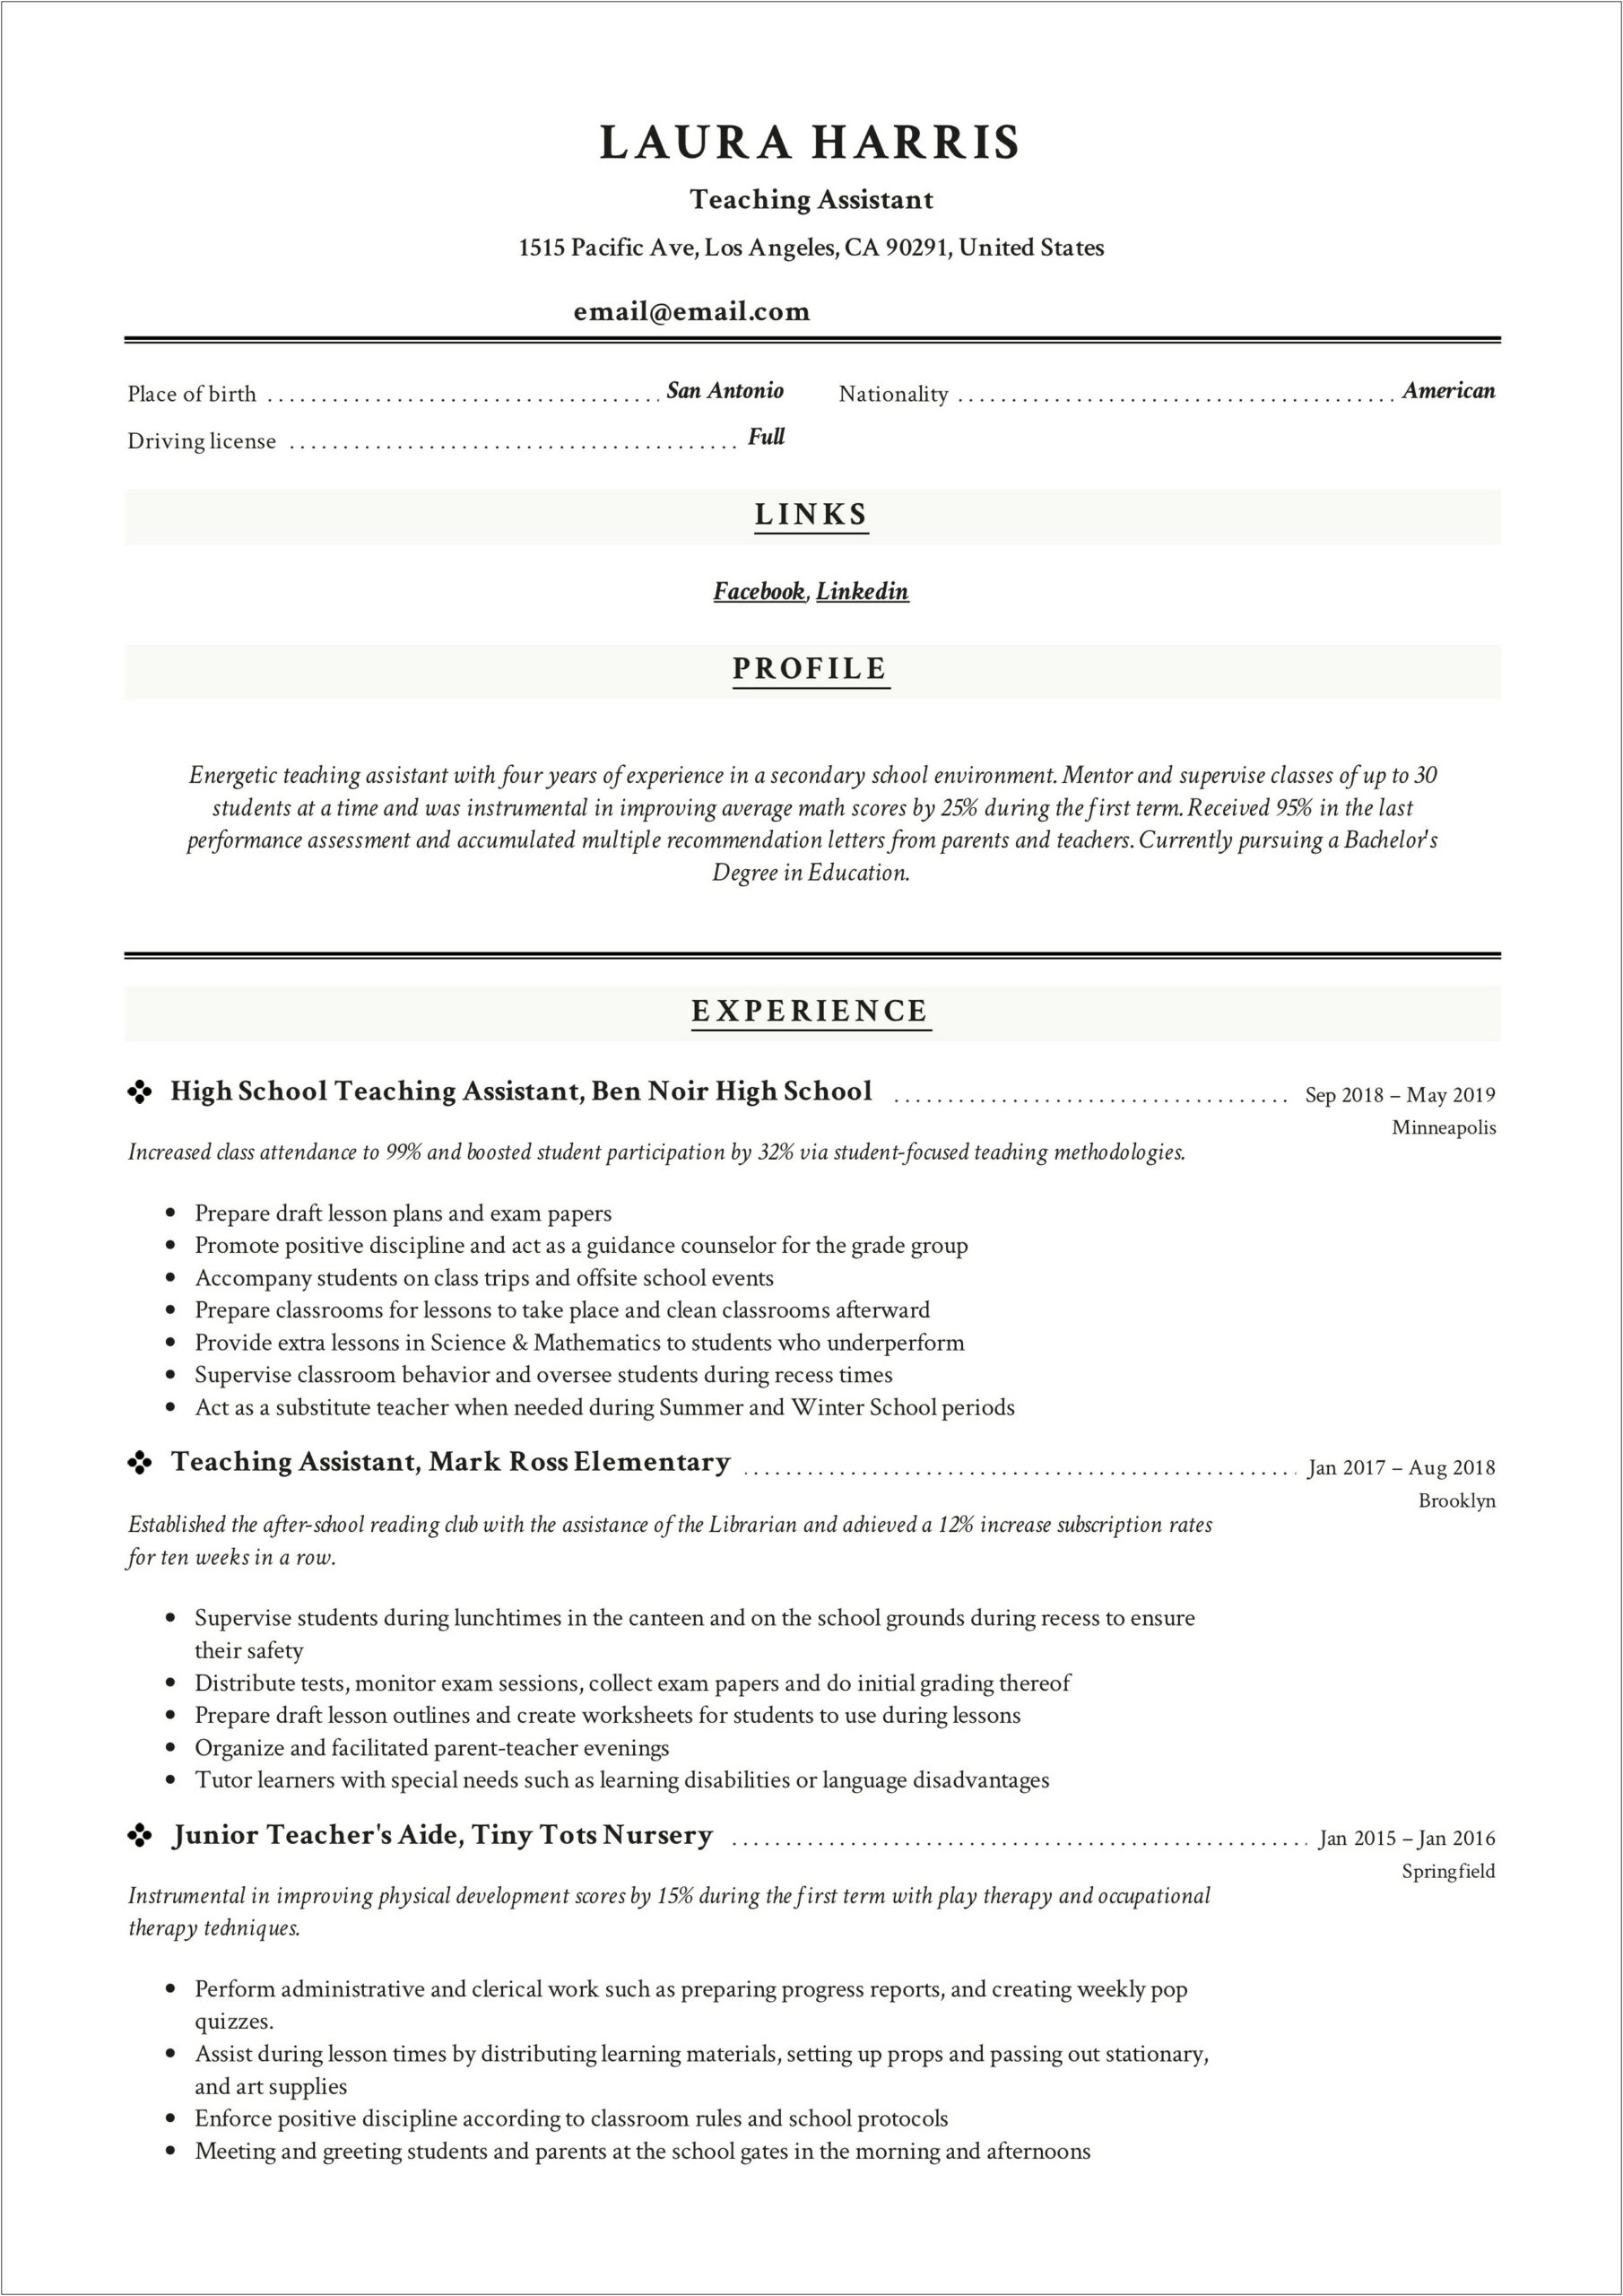 Resume Samples With Education First